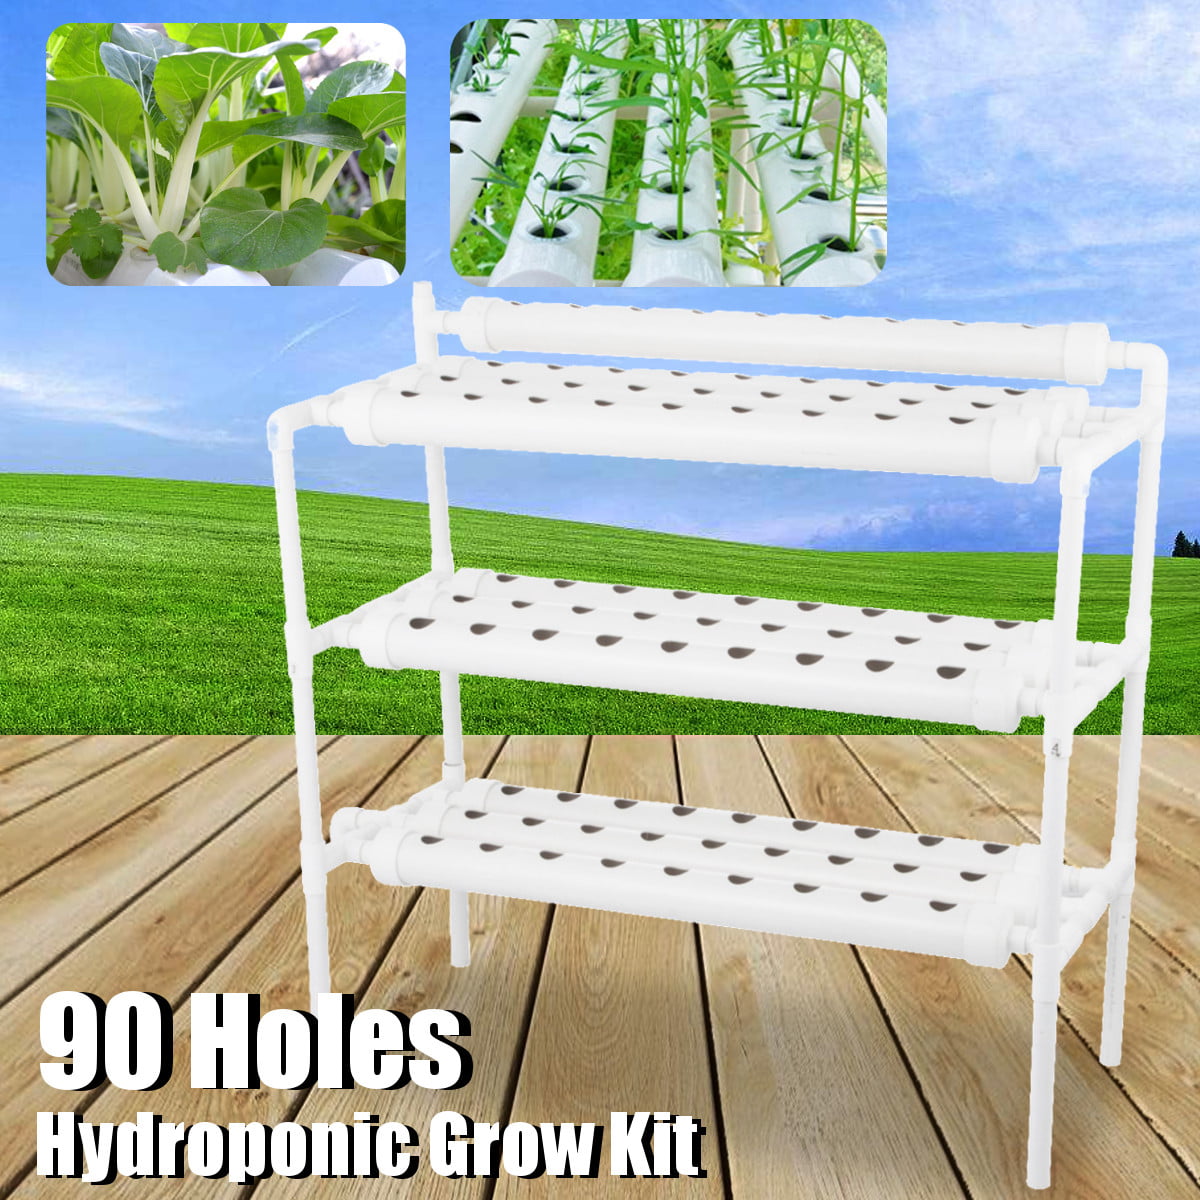 90 Holes Hydroponic Site Grow Kit Ebb and Flow Deep Water Culture Garden System 